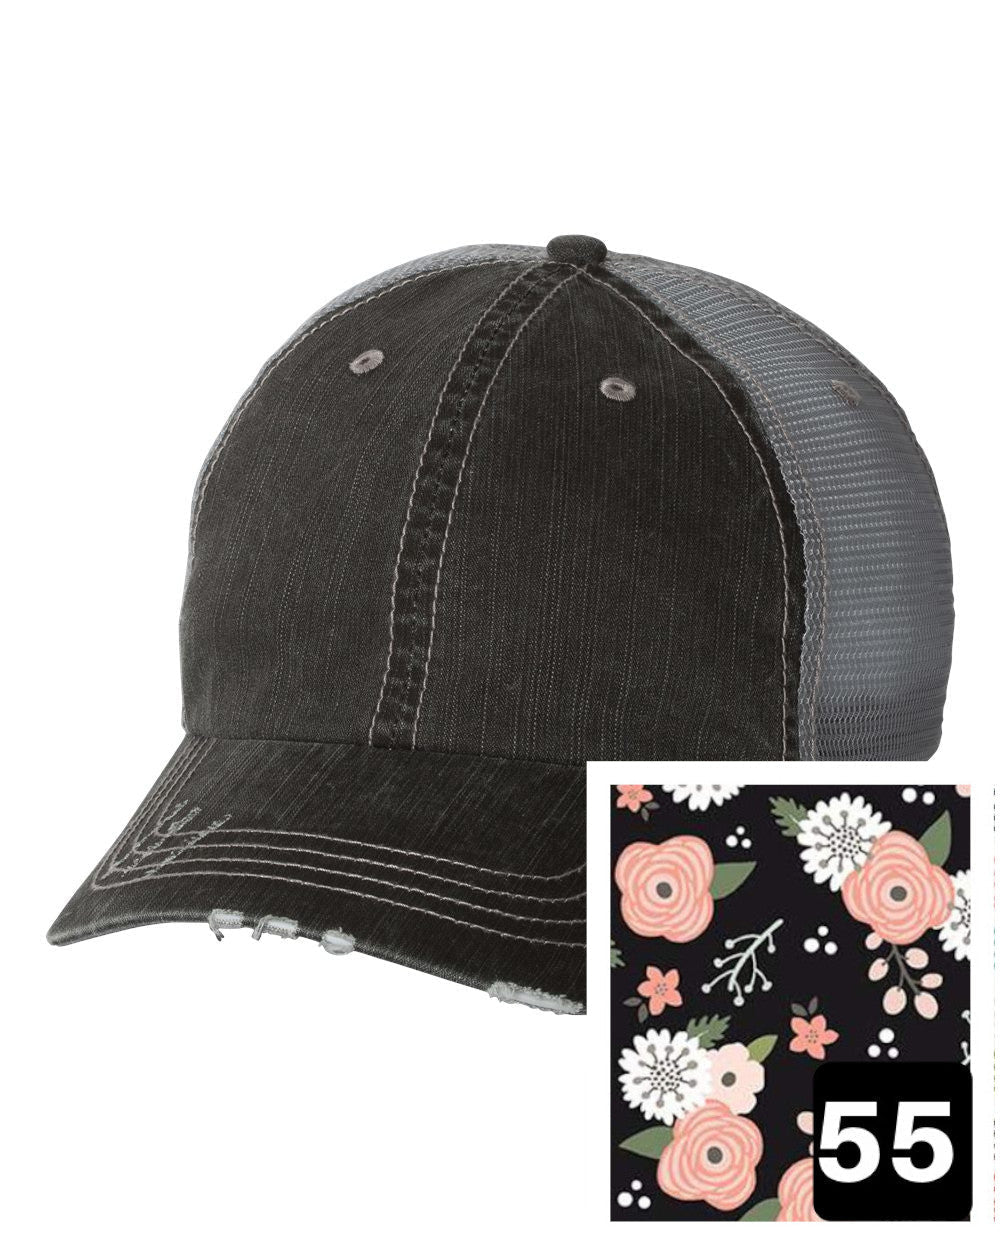 gray distressed trucker hat with petite floral on navy fabric state of West Virginia